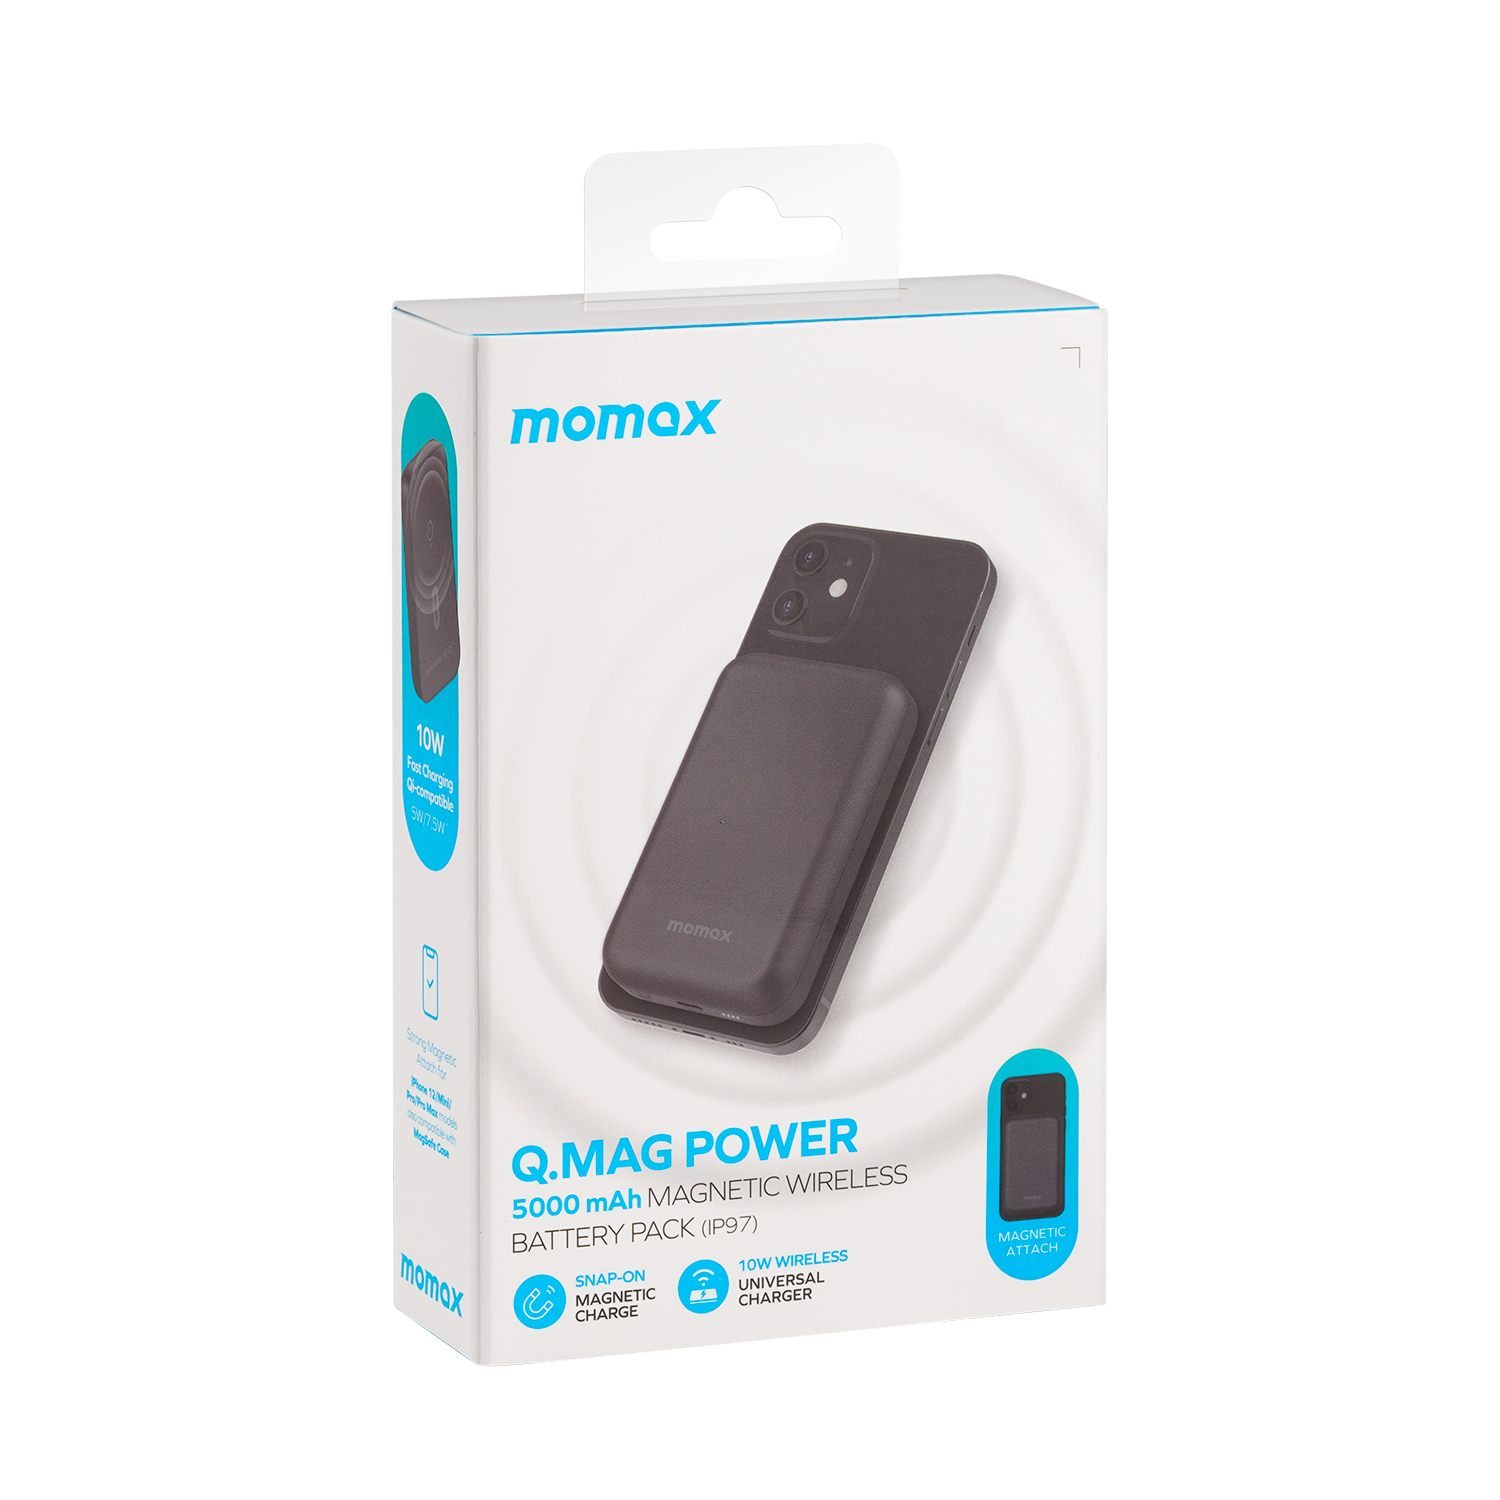 Momax Q.MAG Power Magnetic Wireless Battery Pack MagSafe Power Bank 50